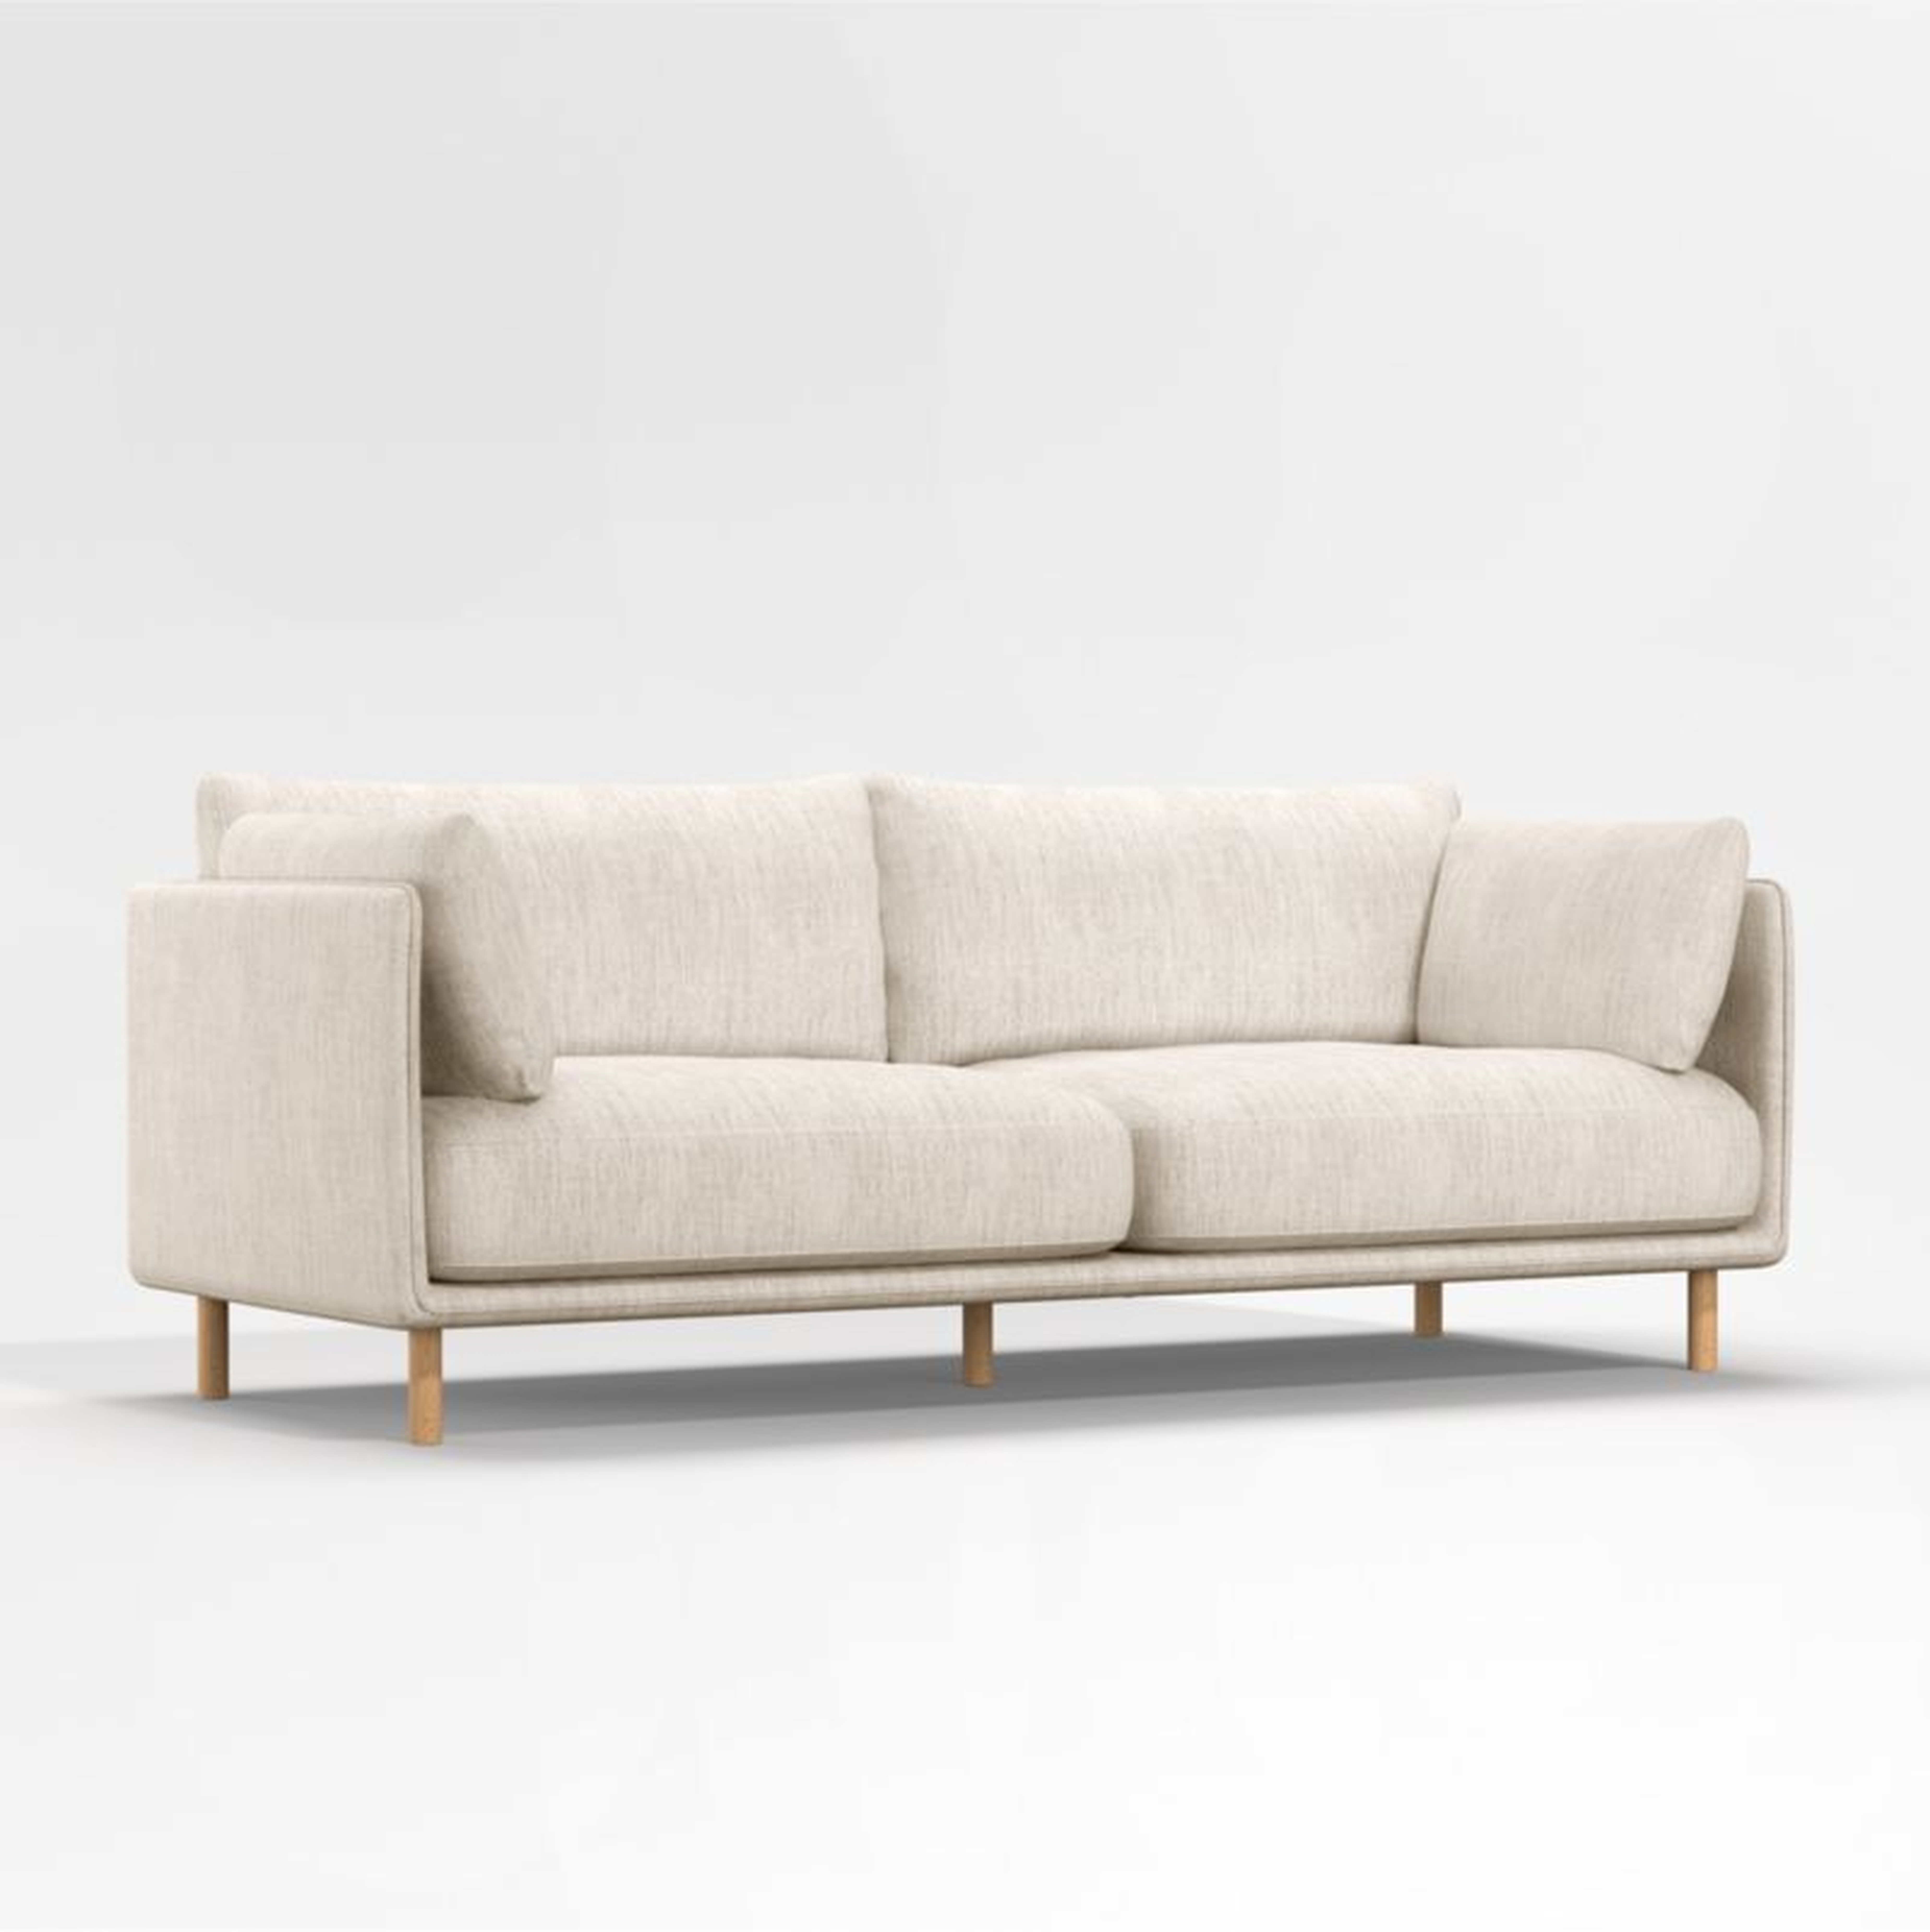 Wells Sofa with Natural Leg Finish - Crate and Barrel